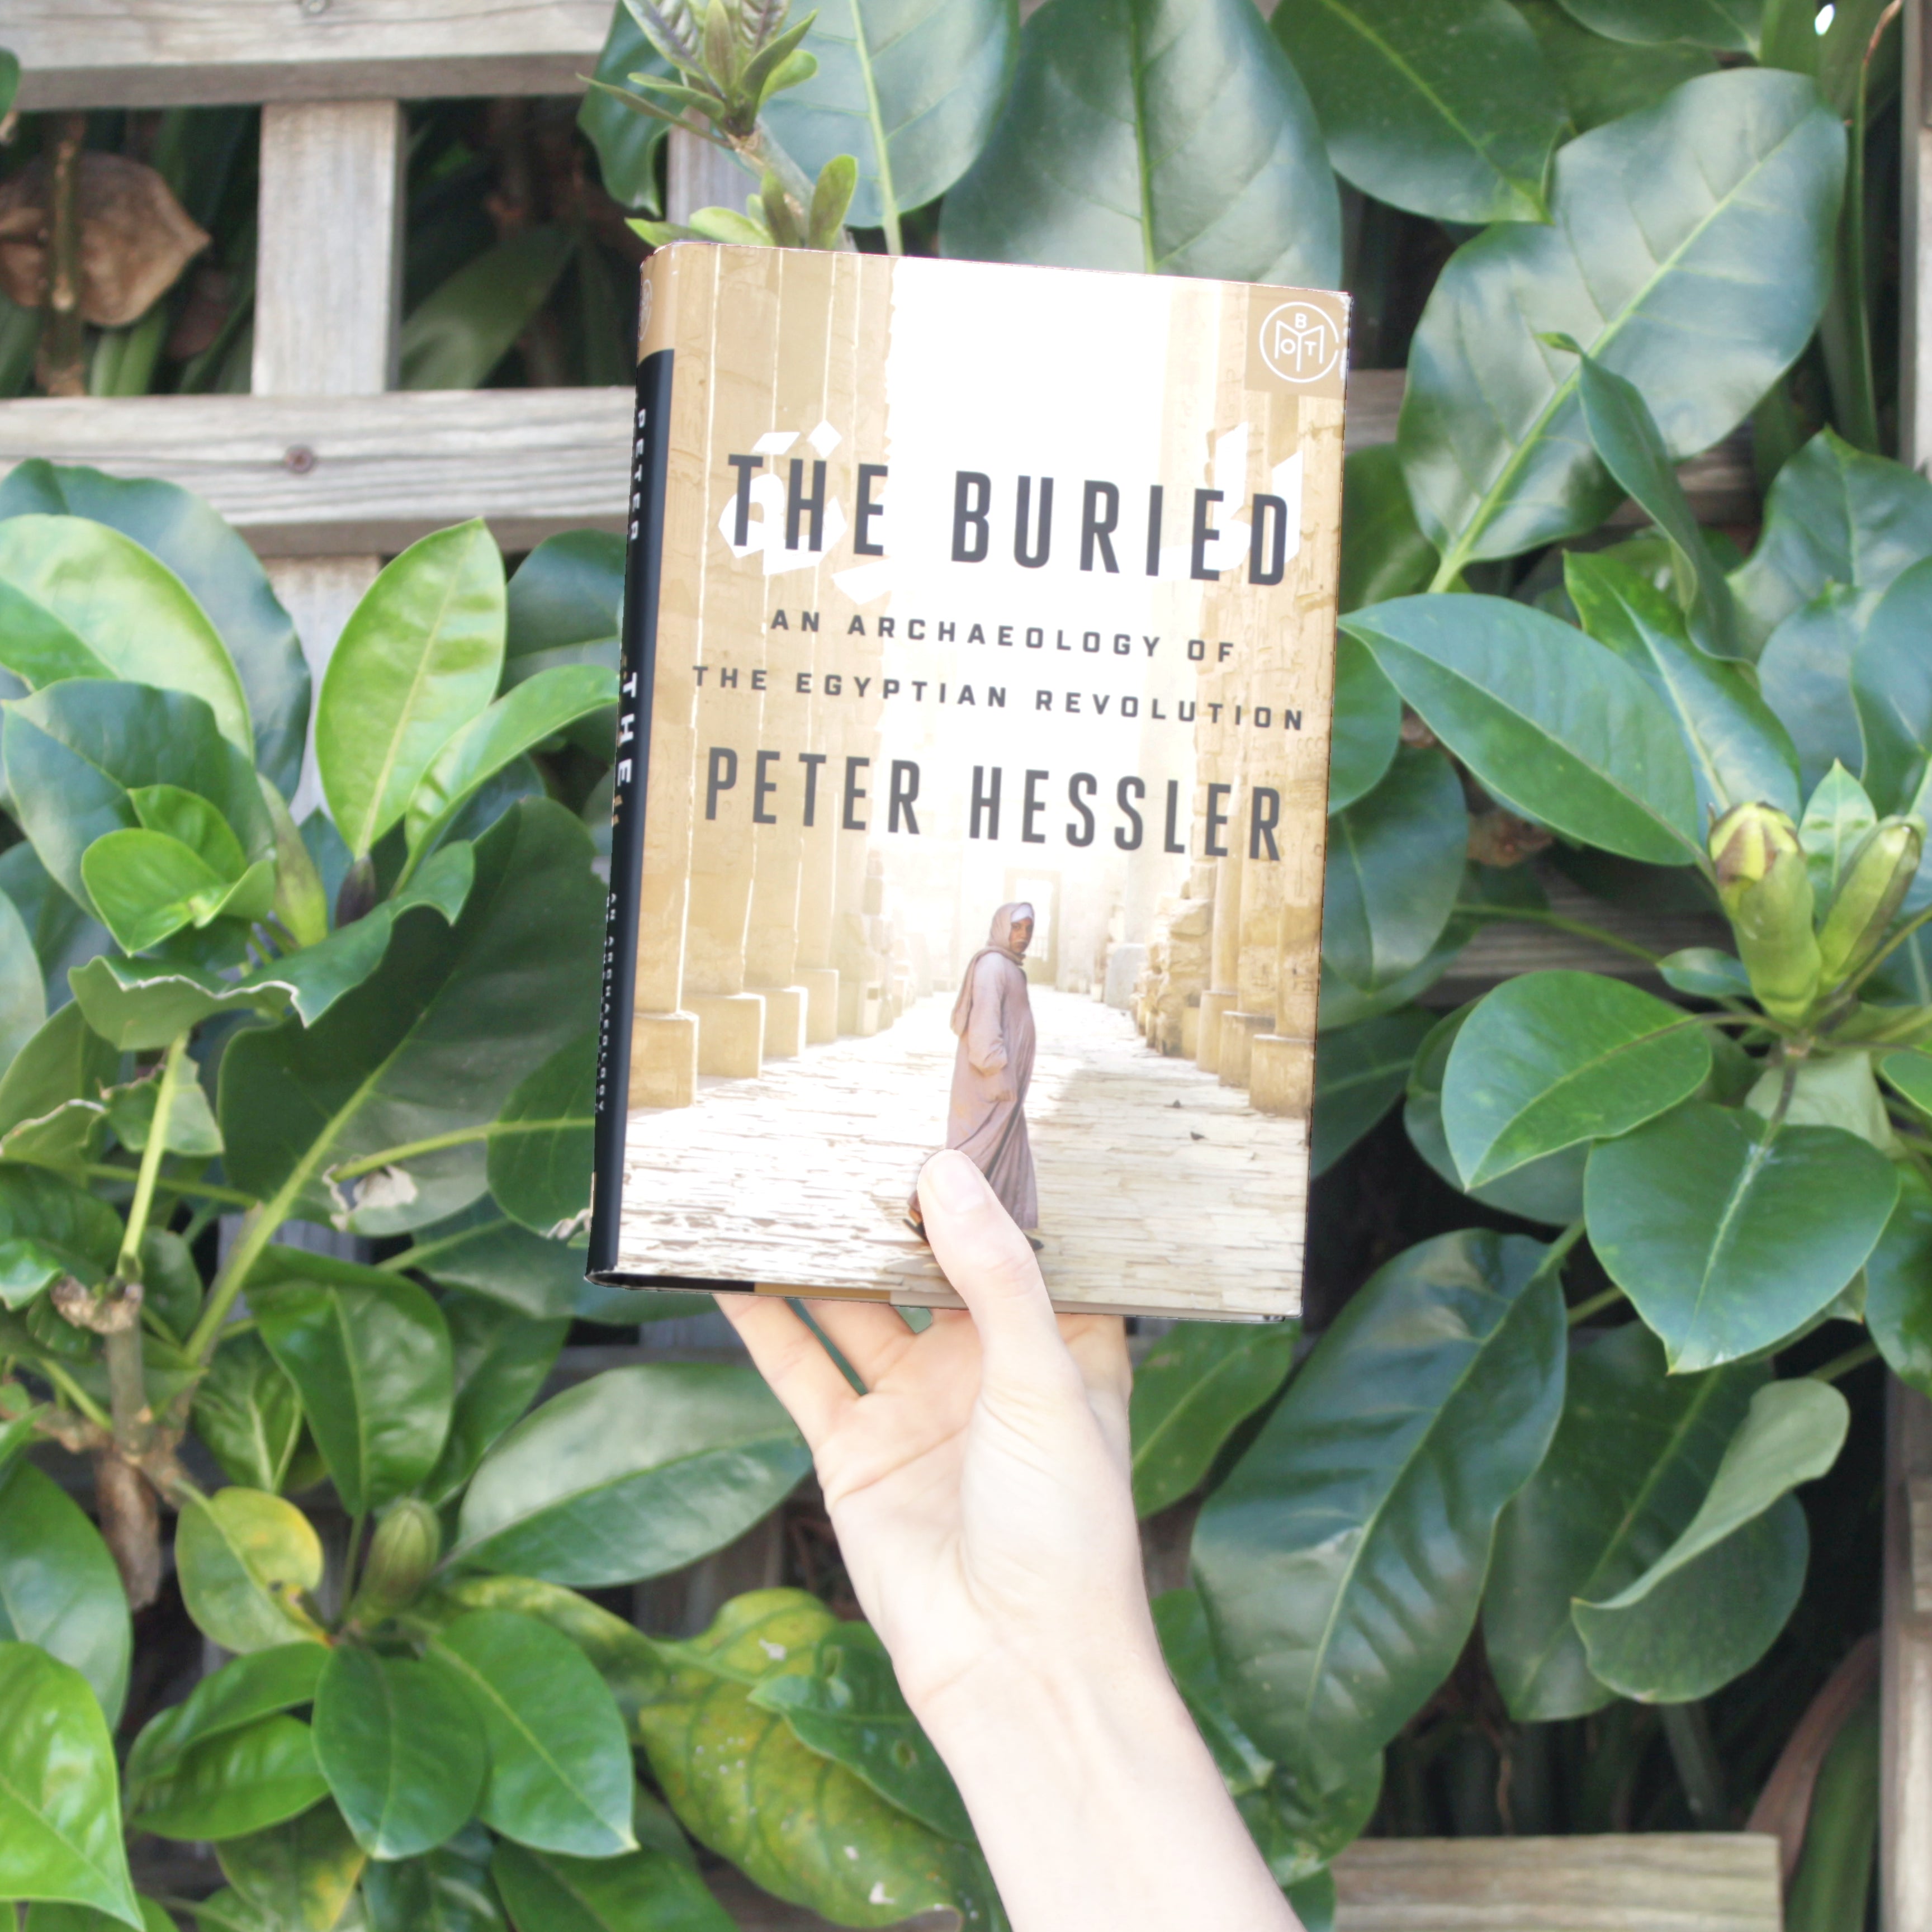 Favorite Sewing Projects & Reads: "The Buried"